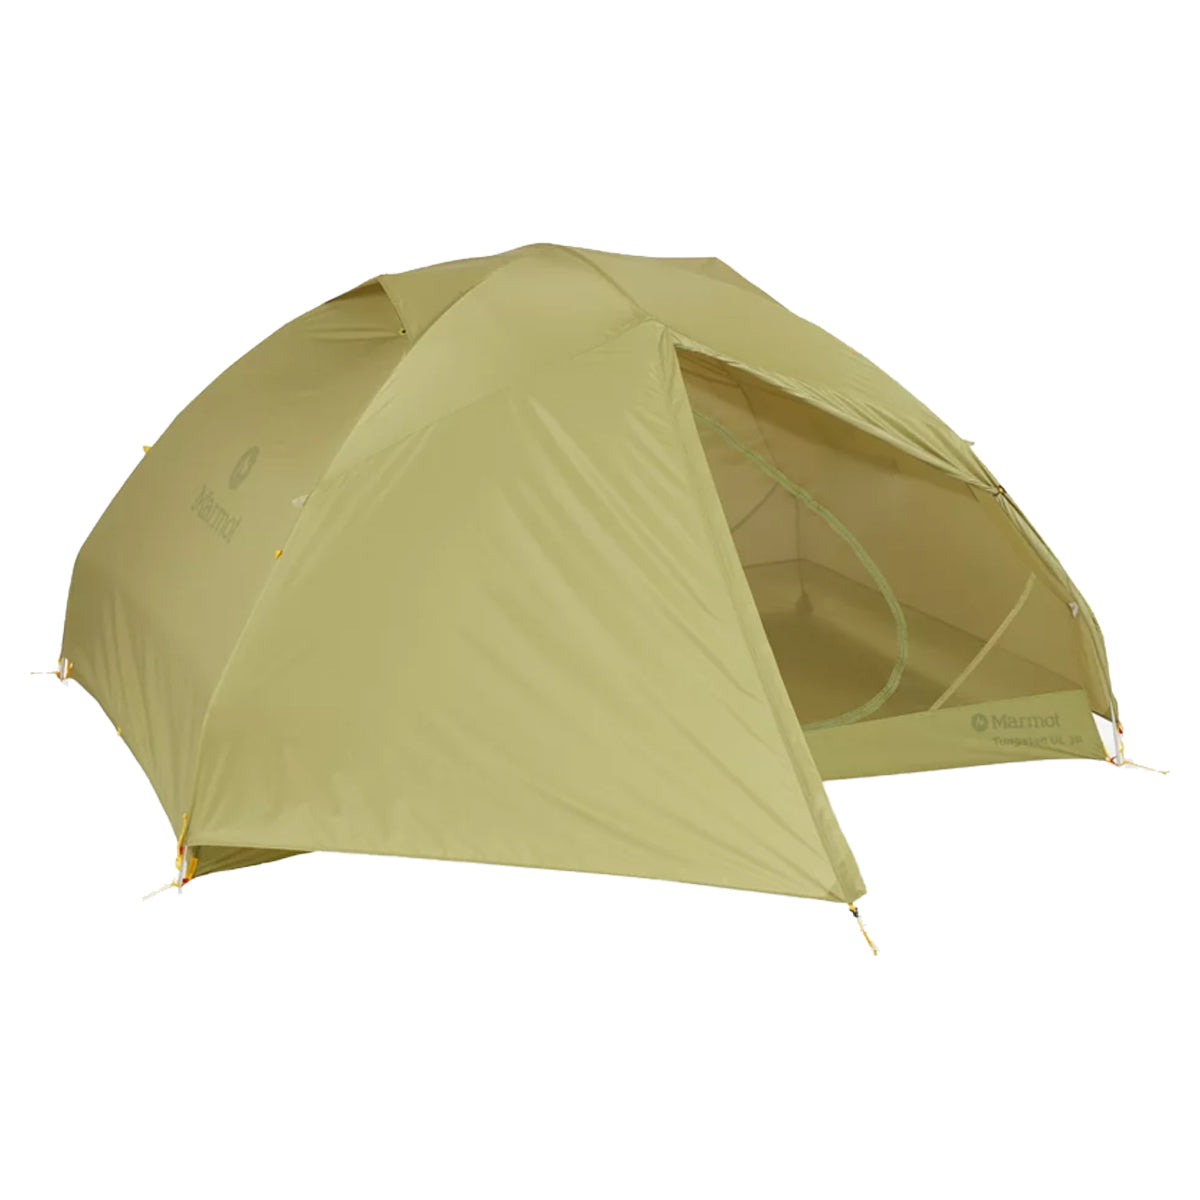 Marmot Tungsten UL 3 Person Tent in  by GOHUNT | Marmot - GOHUNT Shop